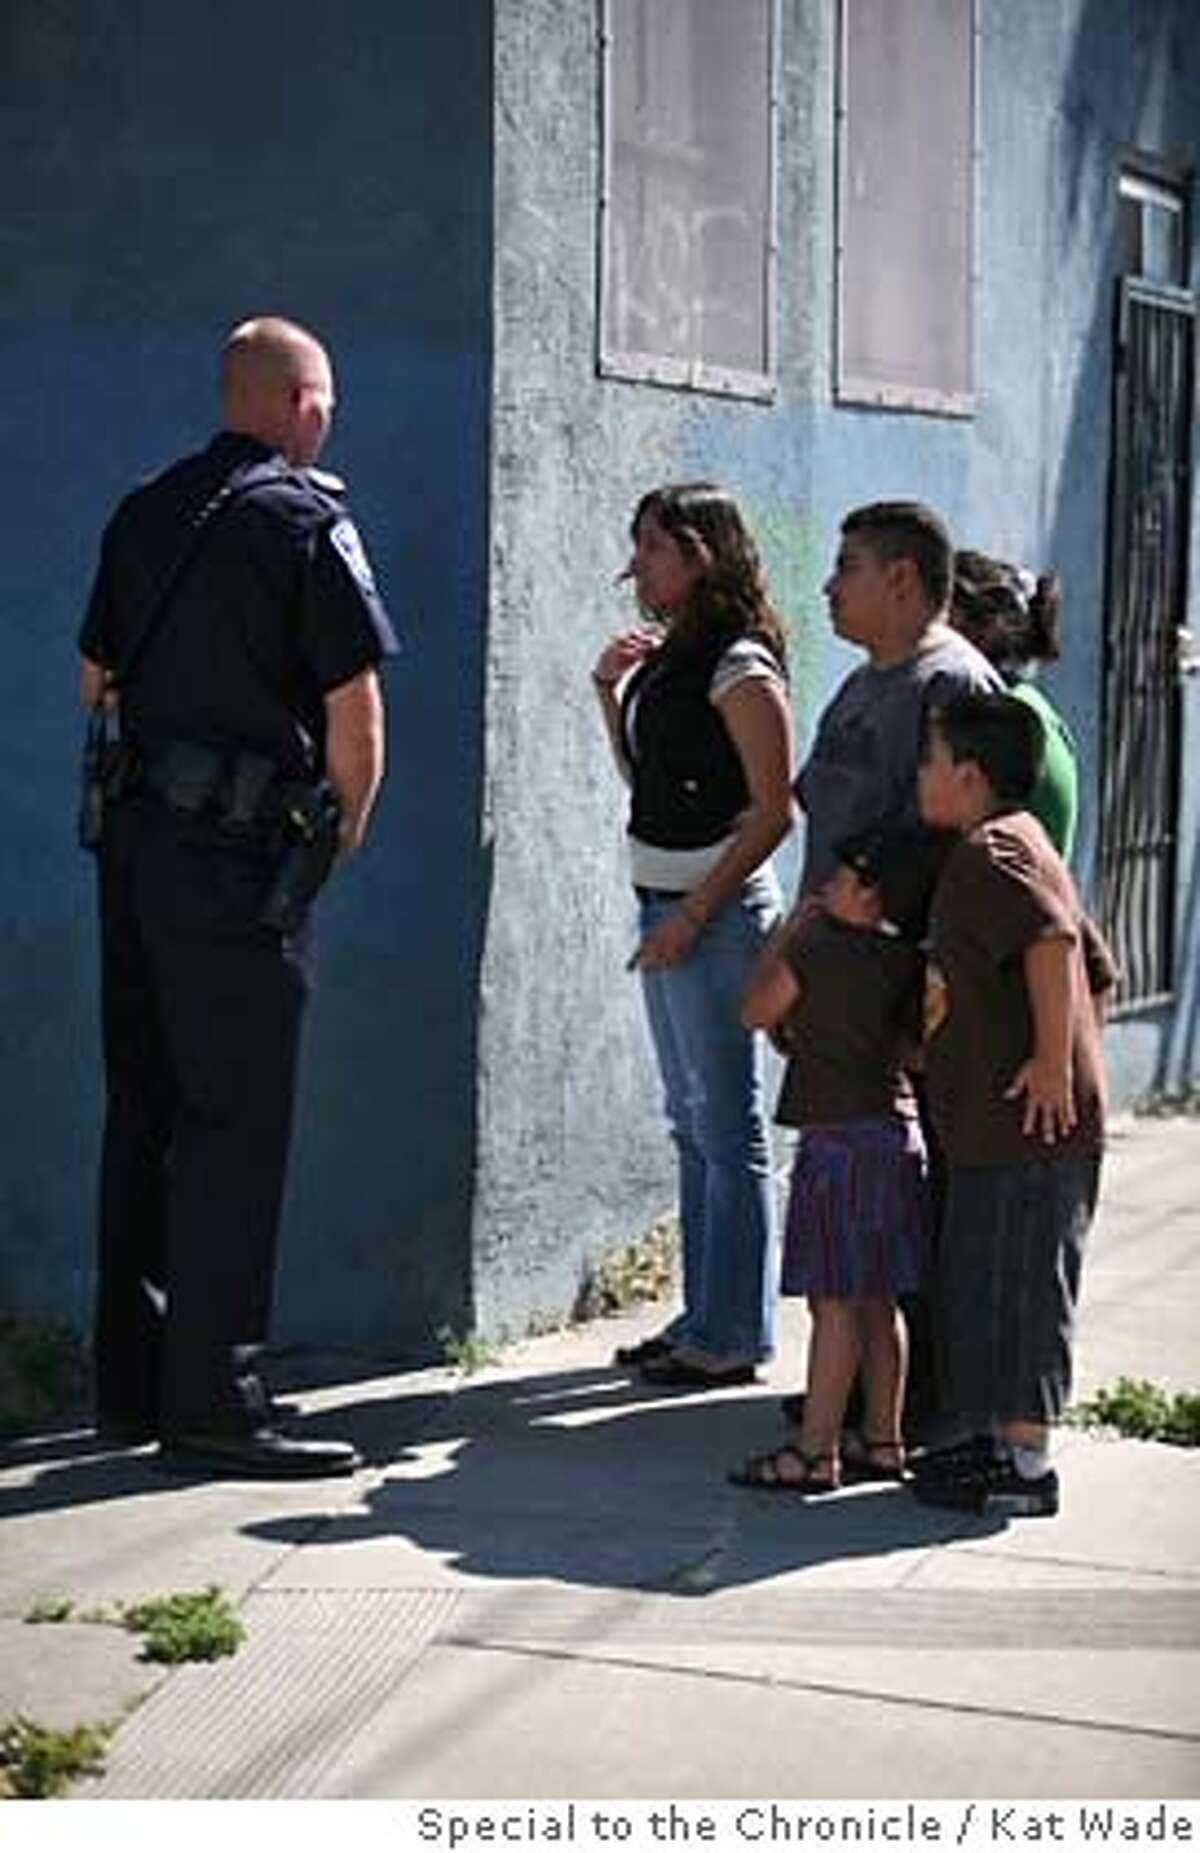 ###Live Caption:From left, Oakland police officer Frank Petersen, stops Marible Melendez, 14, and her family as they try to go home past the scene where a suspect was killed at 29th Avenue and East 7th Street in Oakland, Calif. on Saturday, April 26, 2008. Photo by Kat Wade / Special to the Chronicle###Caption History:From left, Oakland police officer Frank Petersen, stops Marible Melendez, 14, and her family as they try to go home past the scene where a suspect was killed at 29th Avenue and East 7th Street in Oakland, Calif. on Saturday, April 26, 2008. Photo by Kat Wade / Special to the Chronicle###Notes:Frank Petersen, stops Marible Melendez, 14, (CQ< subjects) The others left before they could give their names I heard that the dead suspect man hijacked a car and had the owner, an old-man in handcuffs.###Special Instructions:Mandatory Credit for photographer and S.F. CHRONICLE/No Sales - mags out